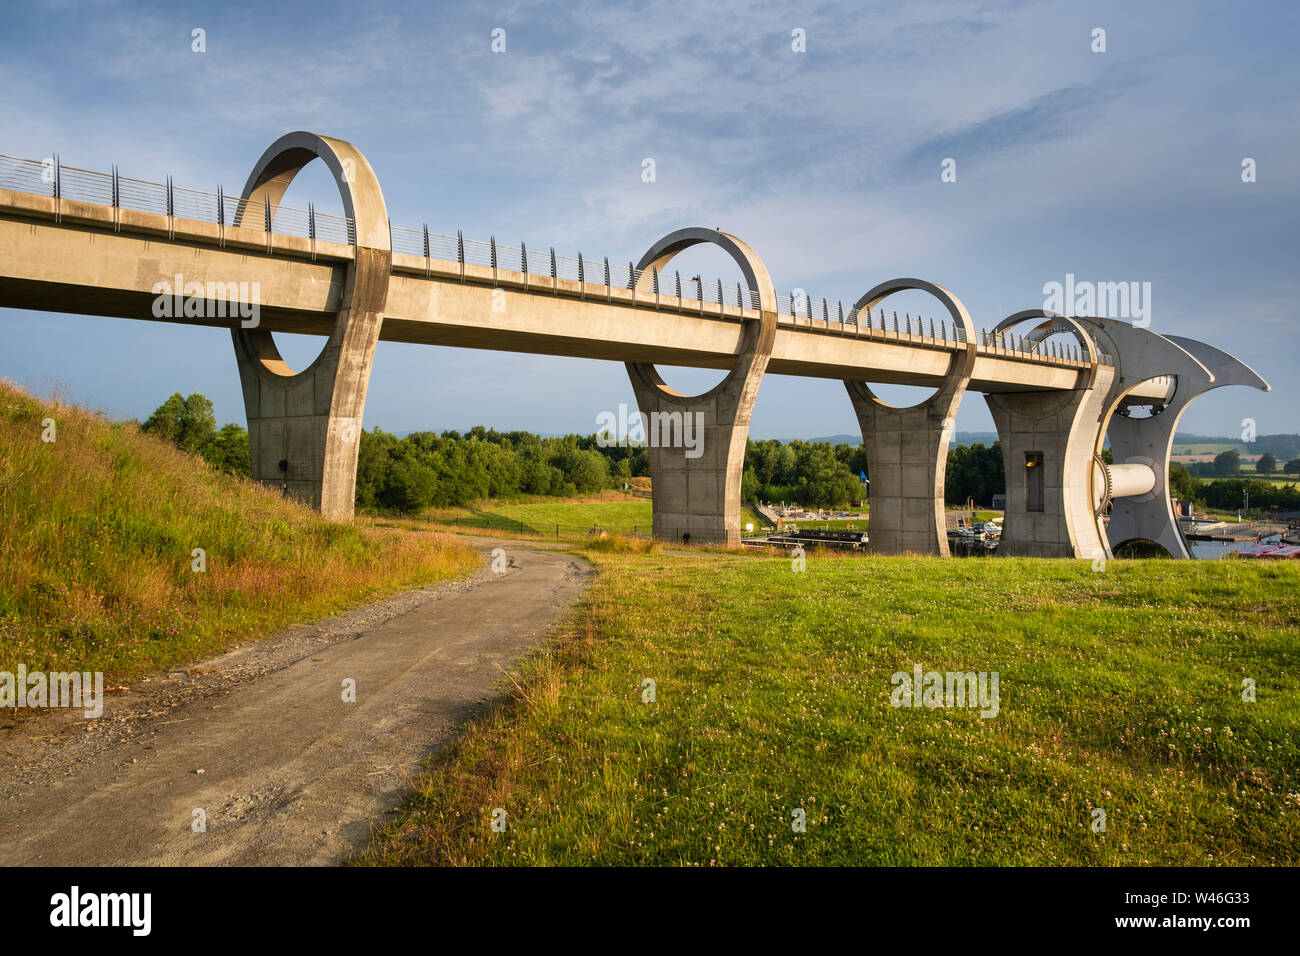 The Falkirk Wheel in Scotland is a rotating canal boat lift a form of high rise lock connecting the Forth and Clyde Canal with the Union Canal. Stock Photo